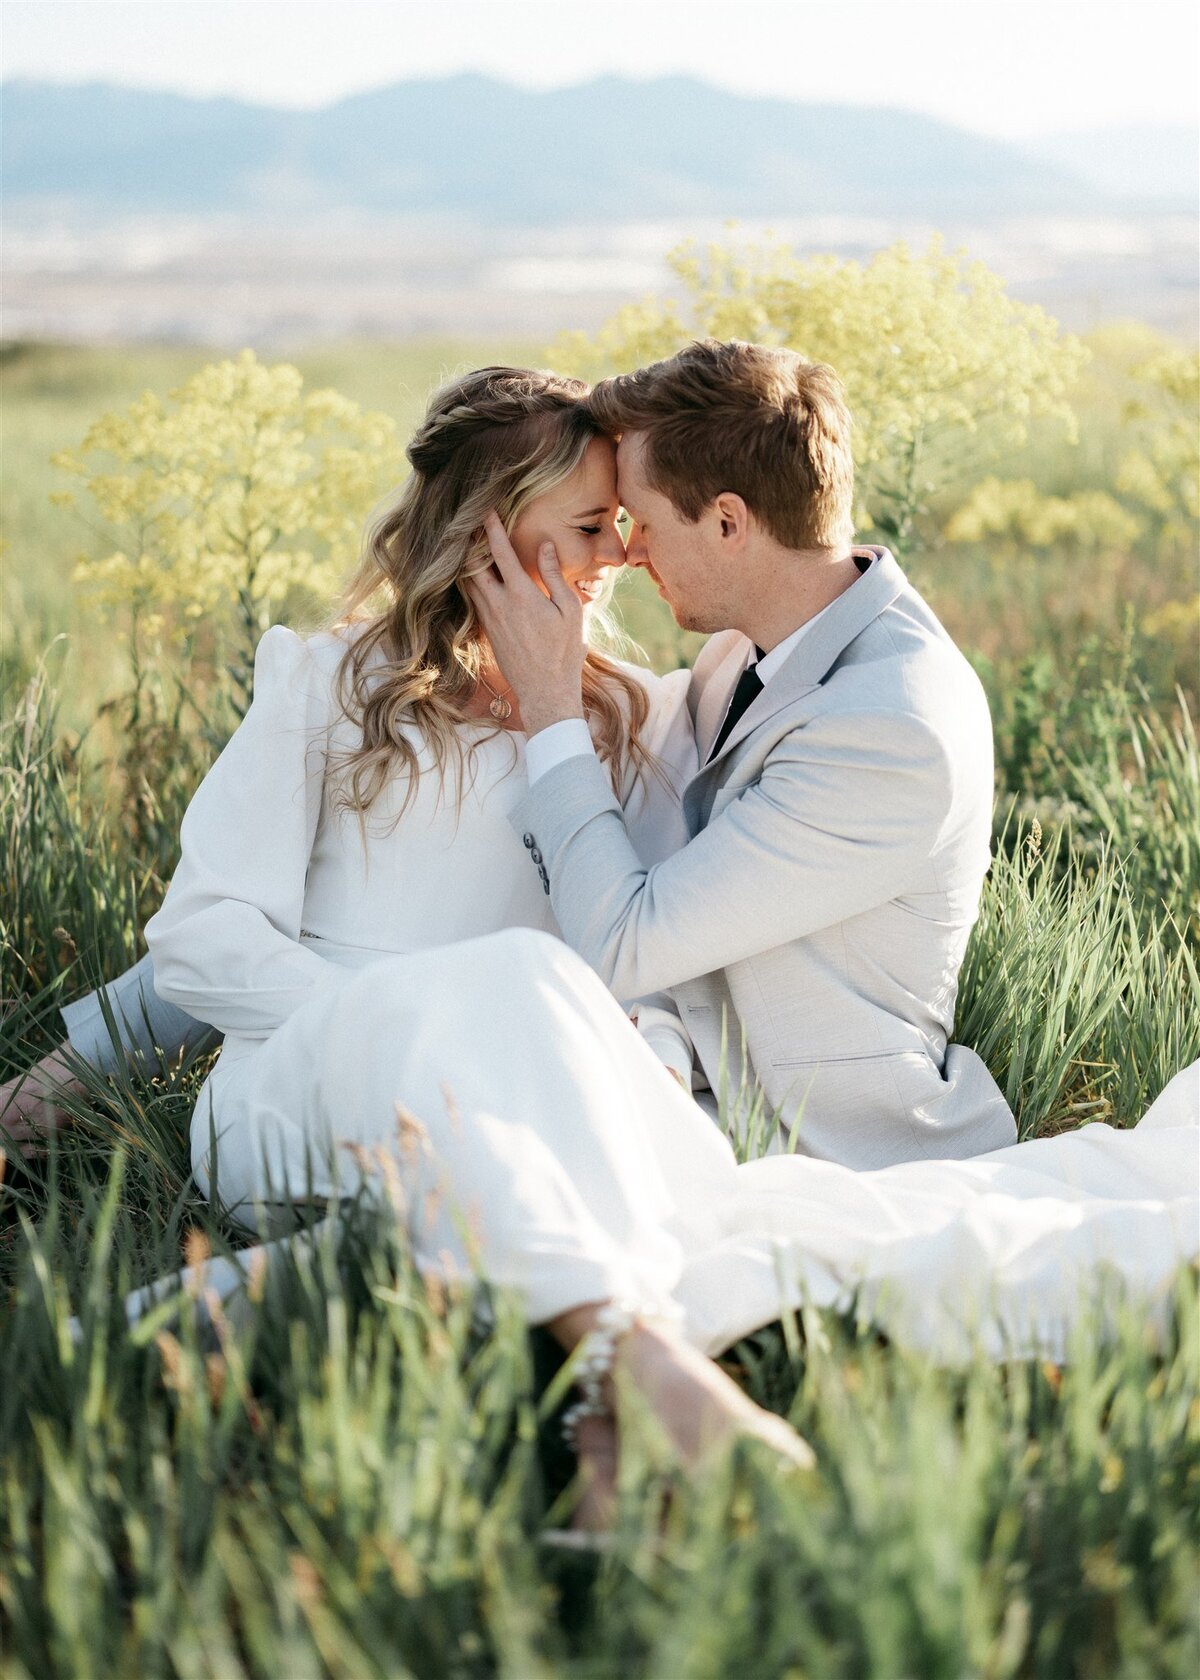 Utah outdoor mountain wedding photography in the grass.